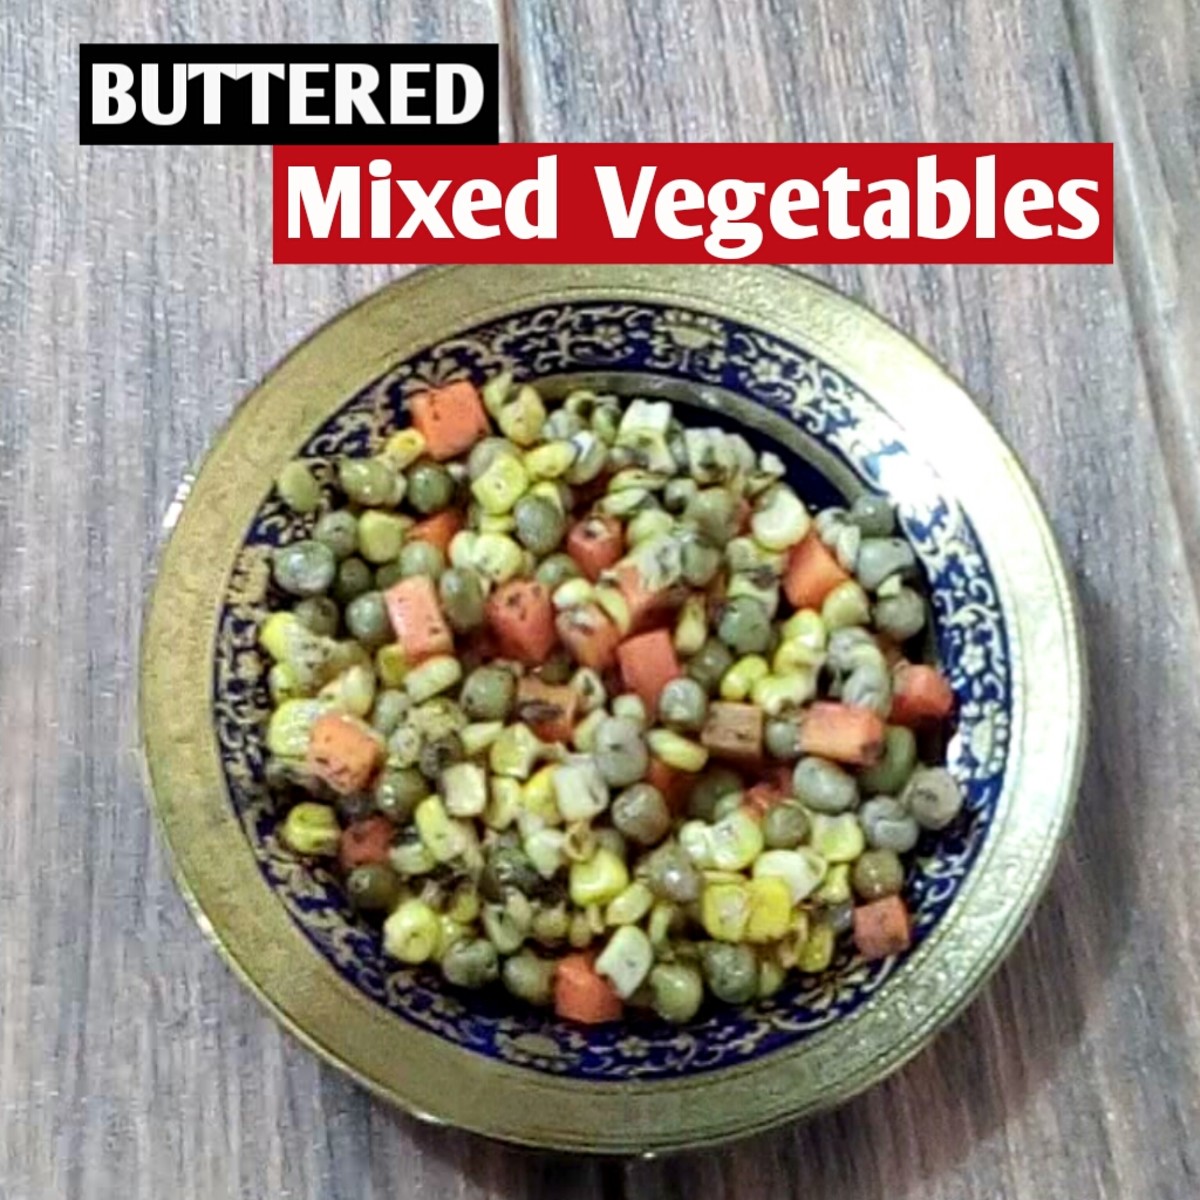 How to Make Buttered Mixed Vegetables